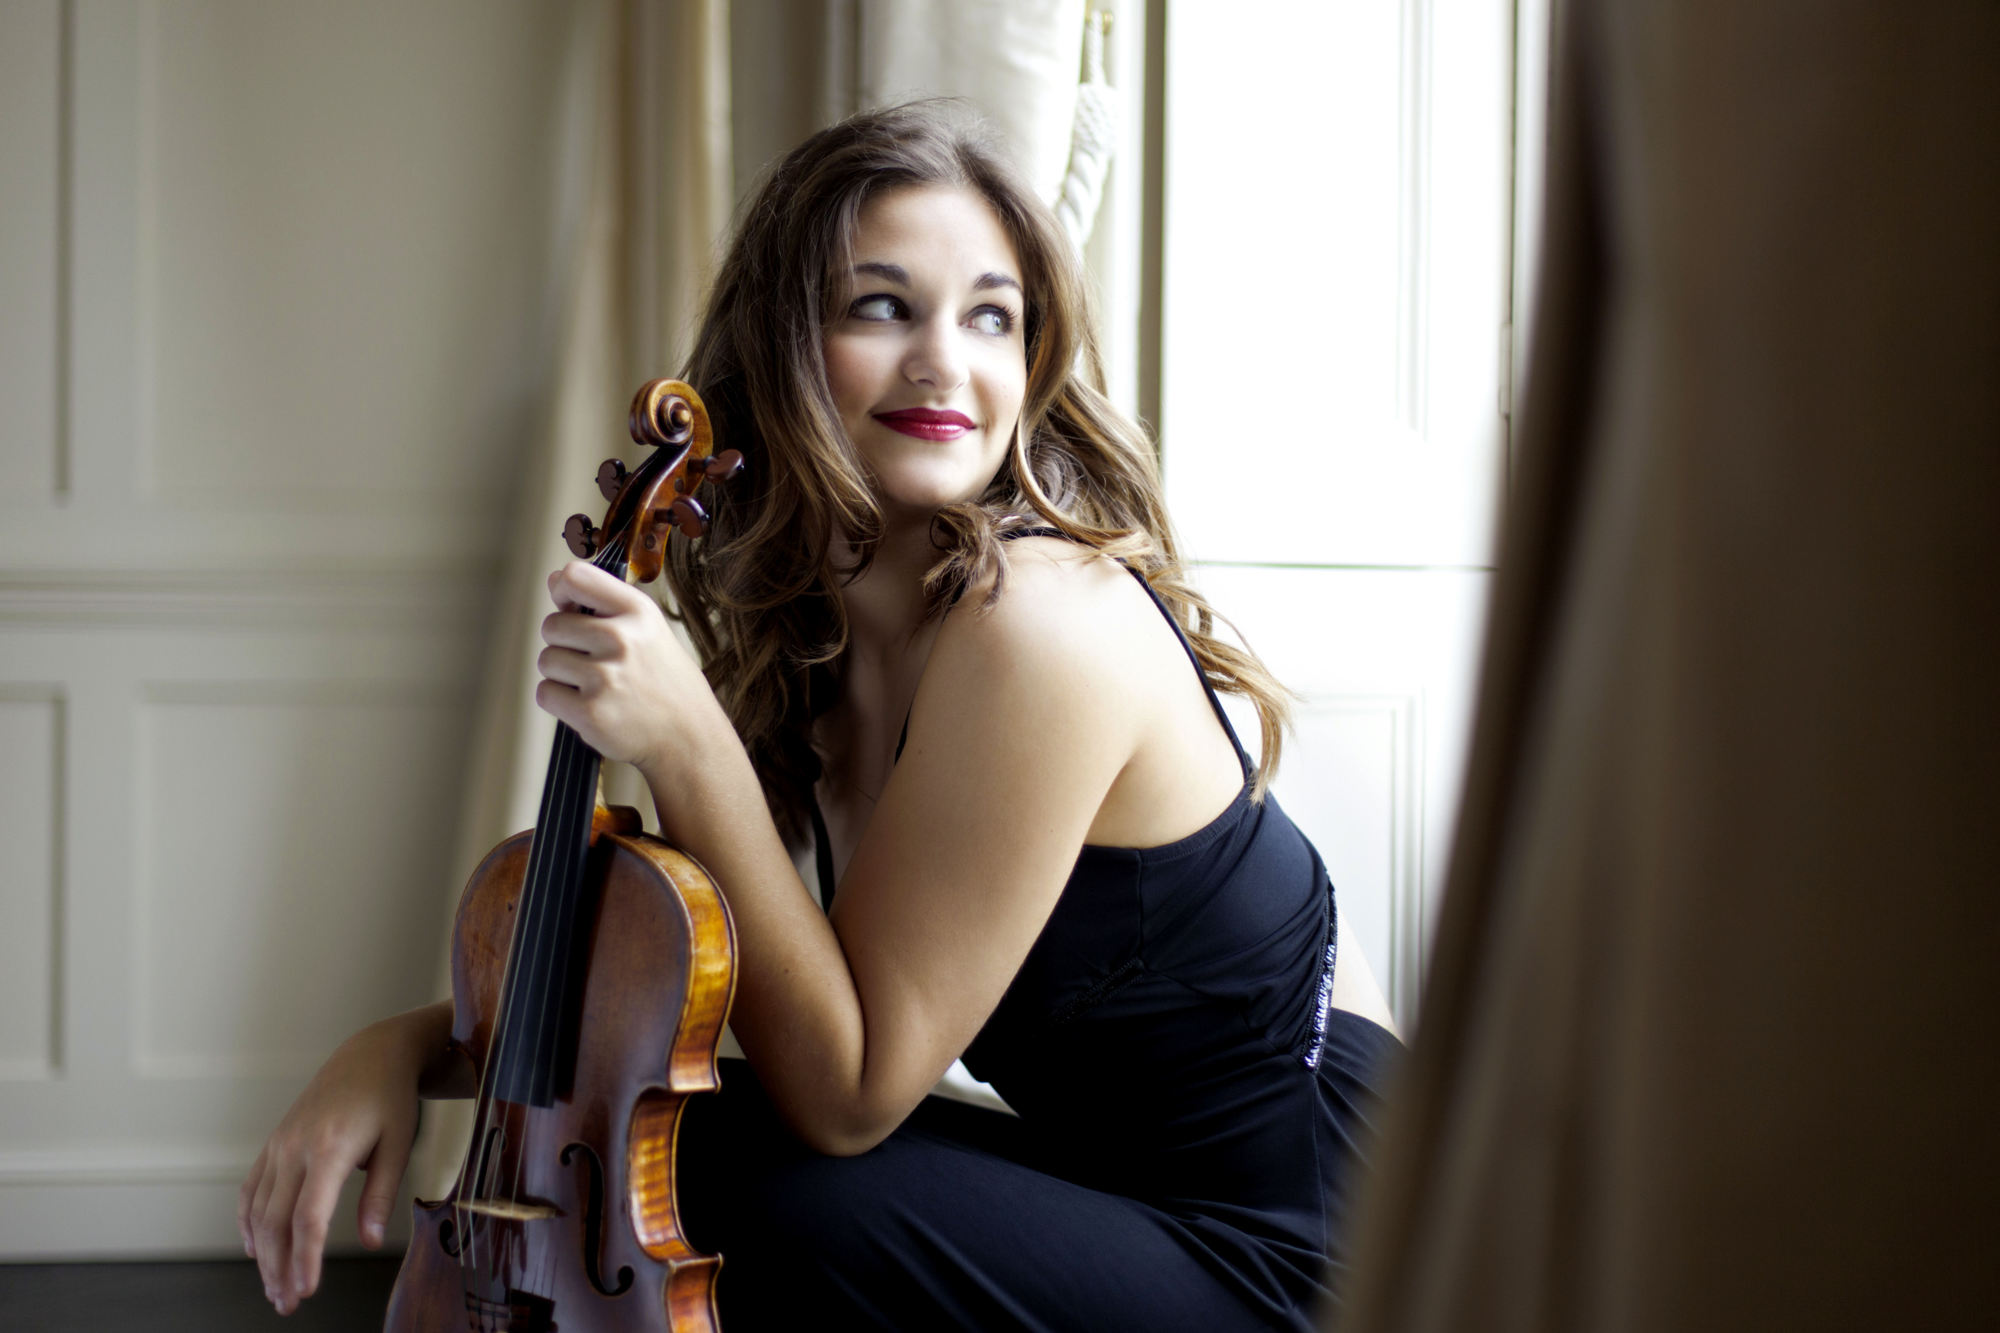 Violinist Alexandra Soumm has been scheduled to be a guest artist at 